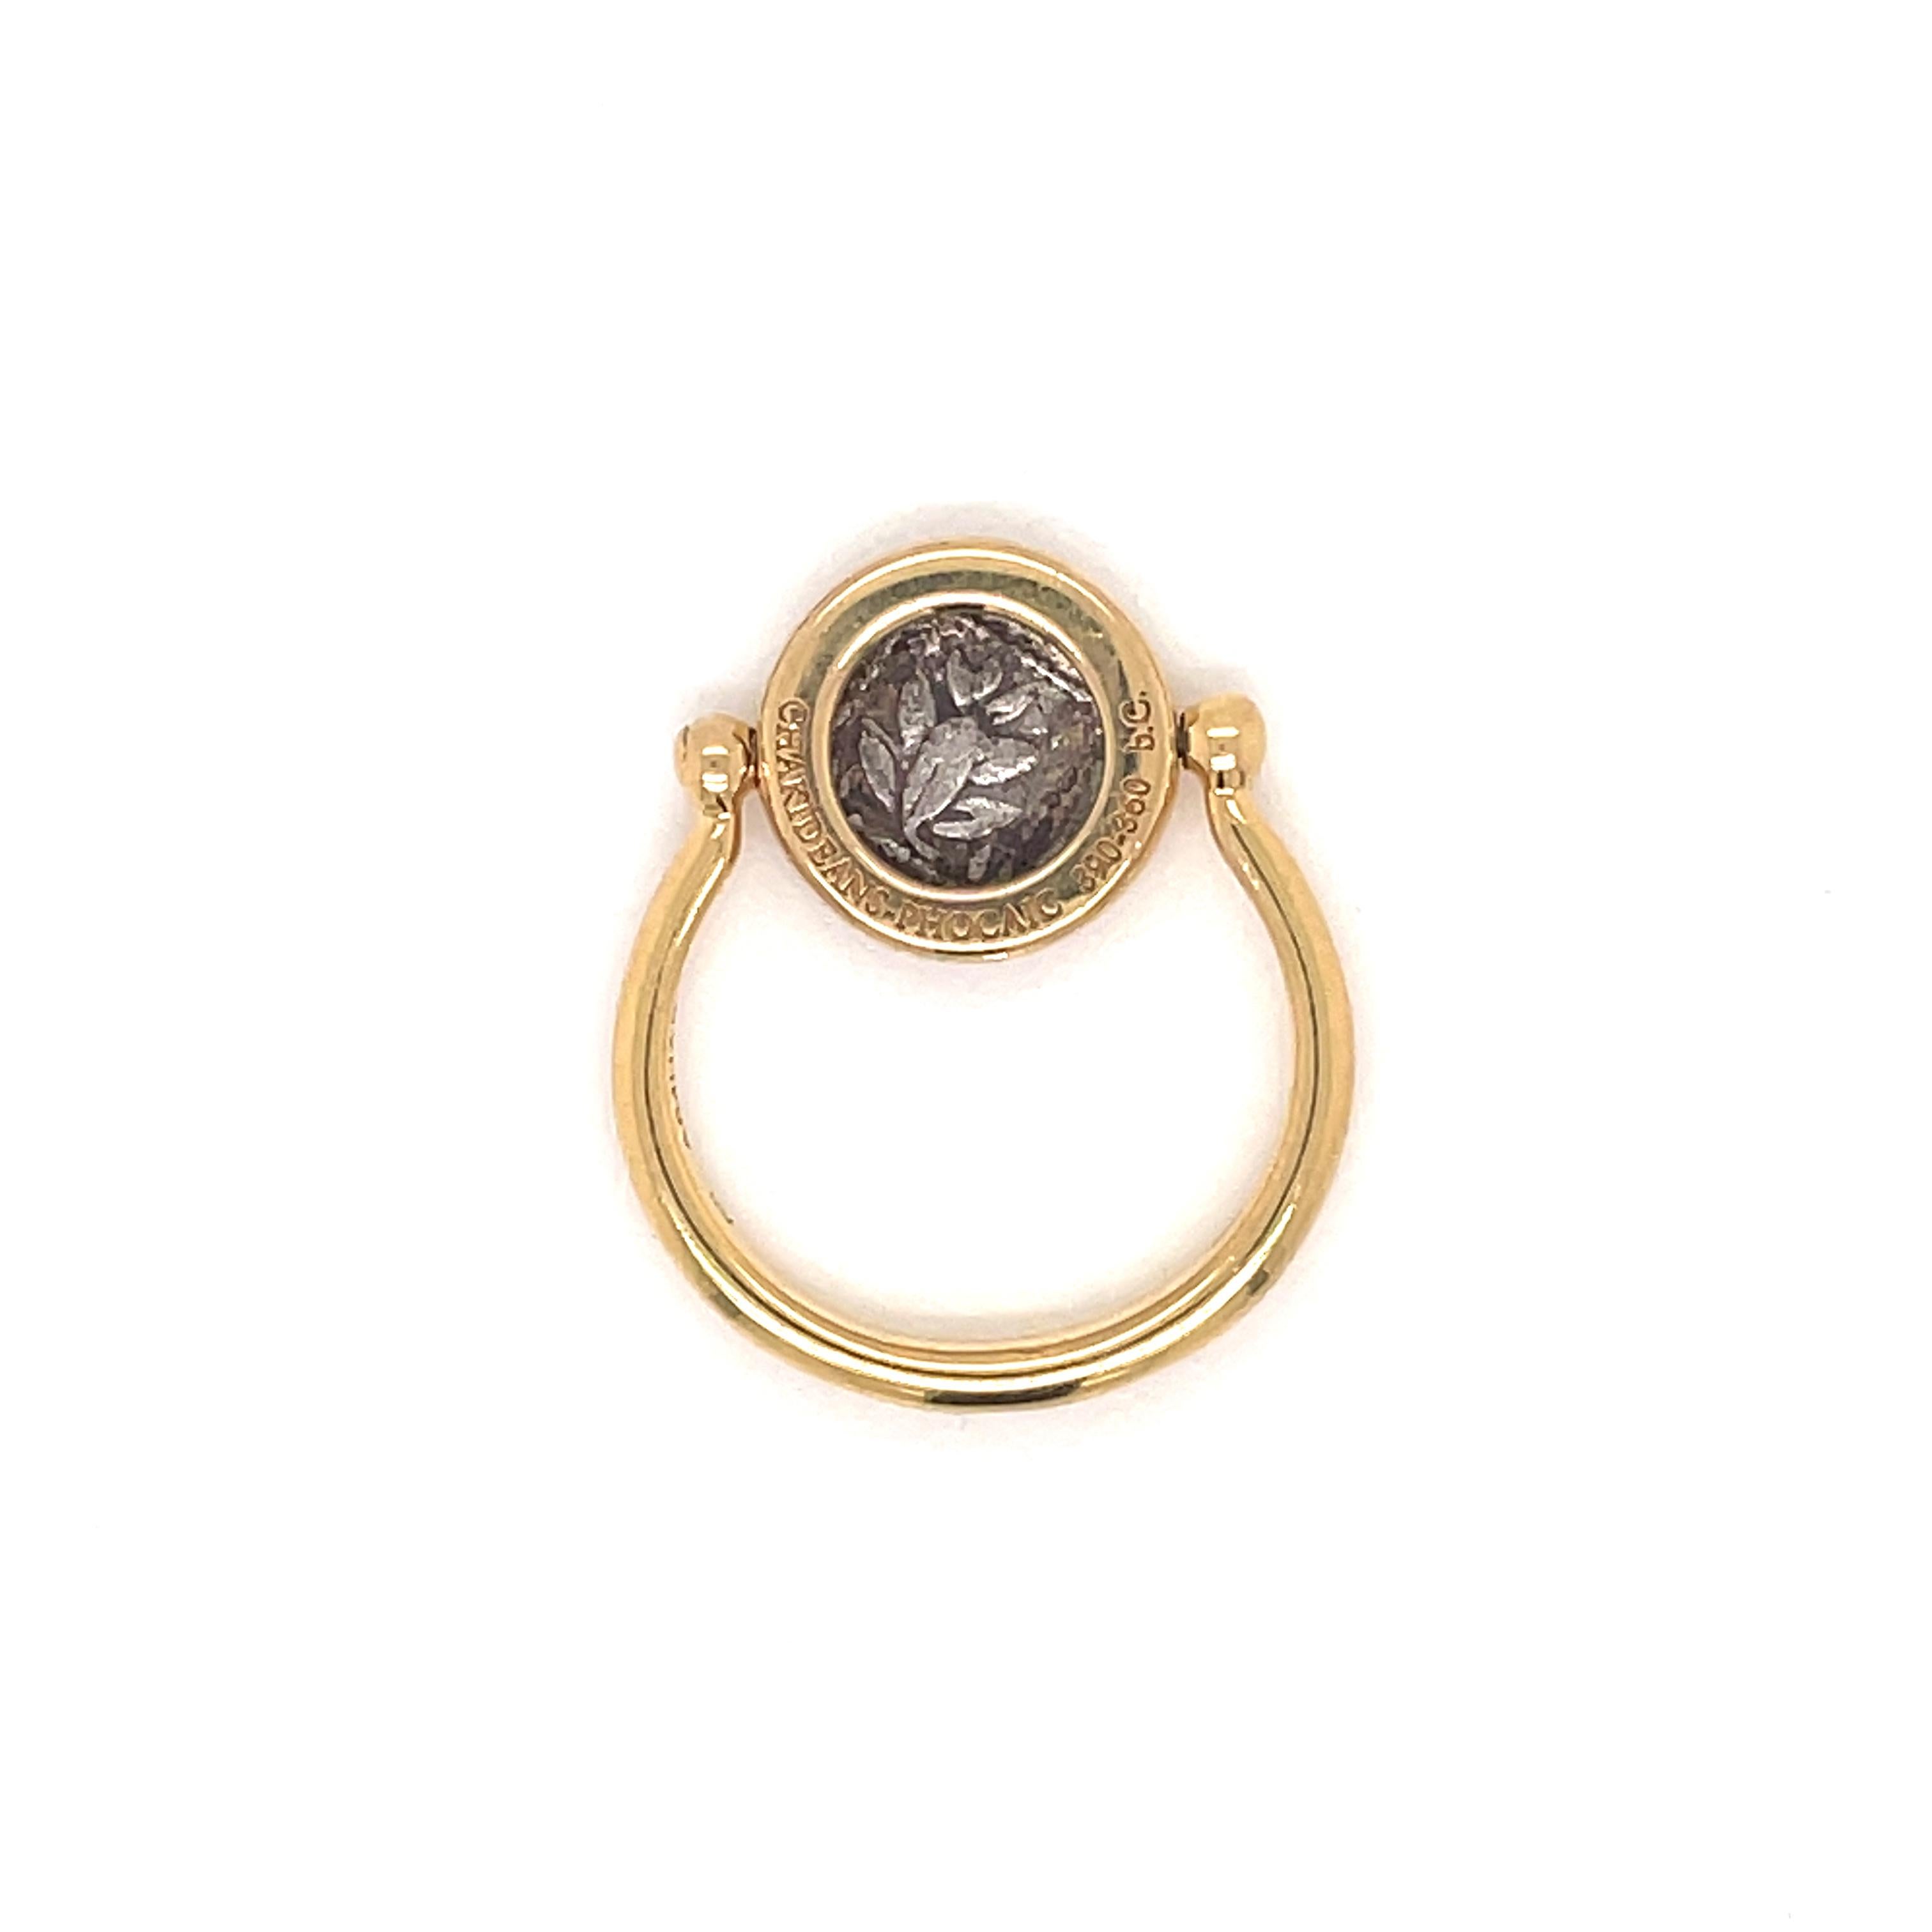 Bulgari 18k gold ring from Monete collection, featuring 12mm ancient 